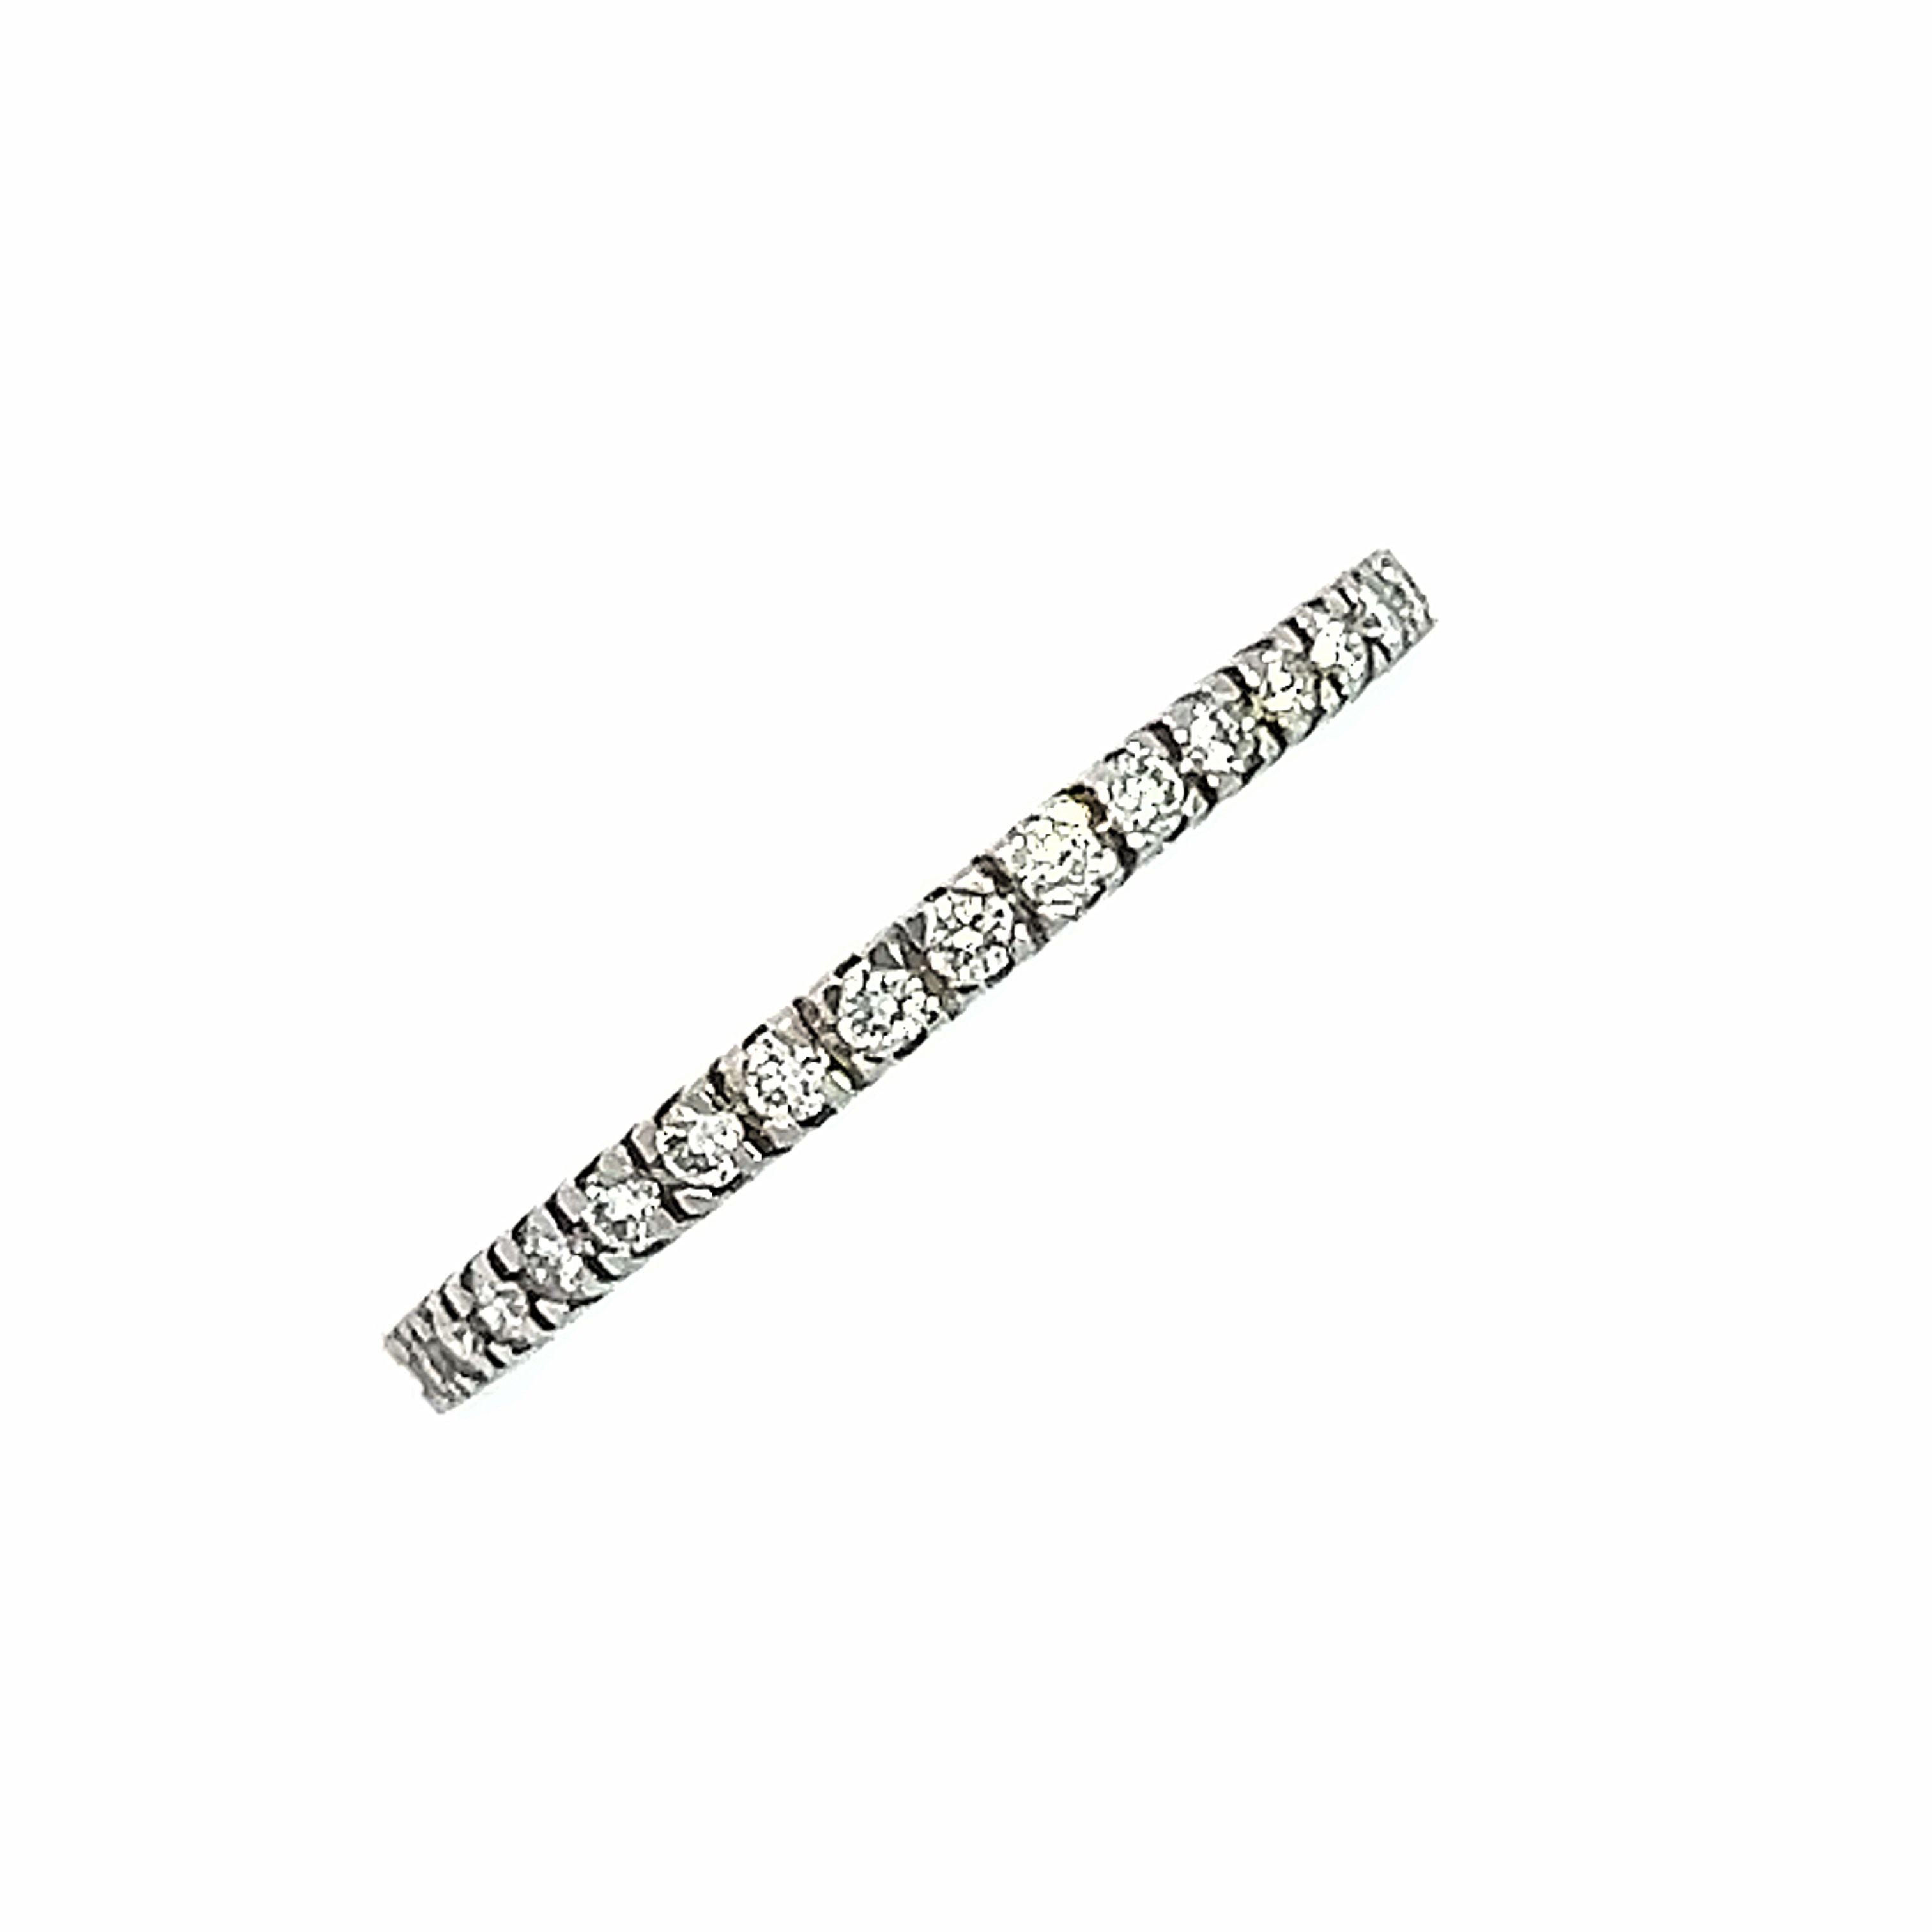 A full diamond set eternity ring in a claw setting style.